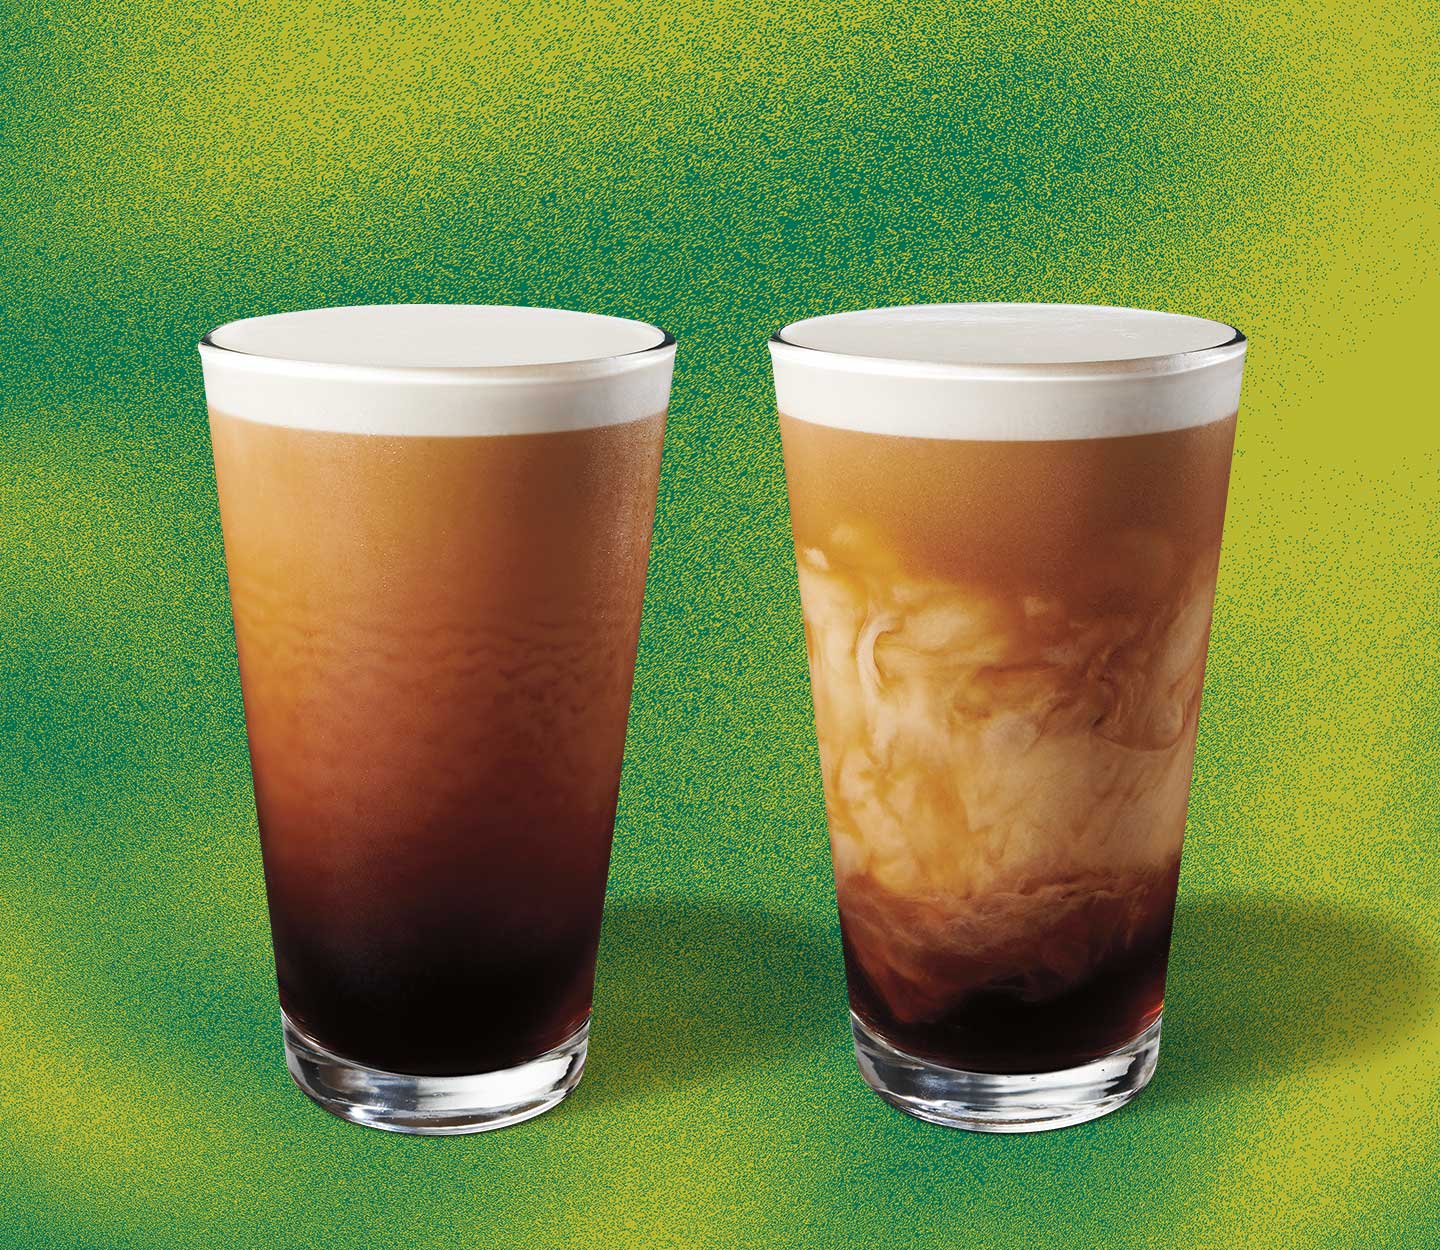 Two cold coffee drinks with frothy tops in tall, clear glasses. The one on the right shows creamy marbling.